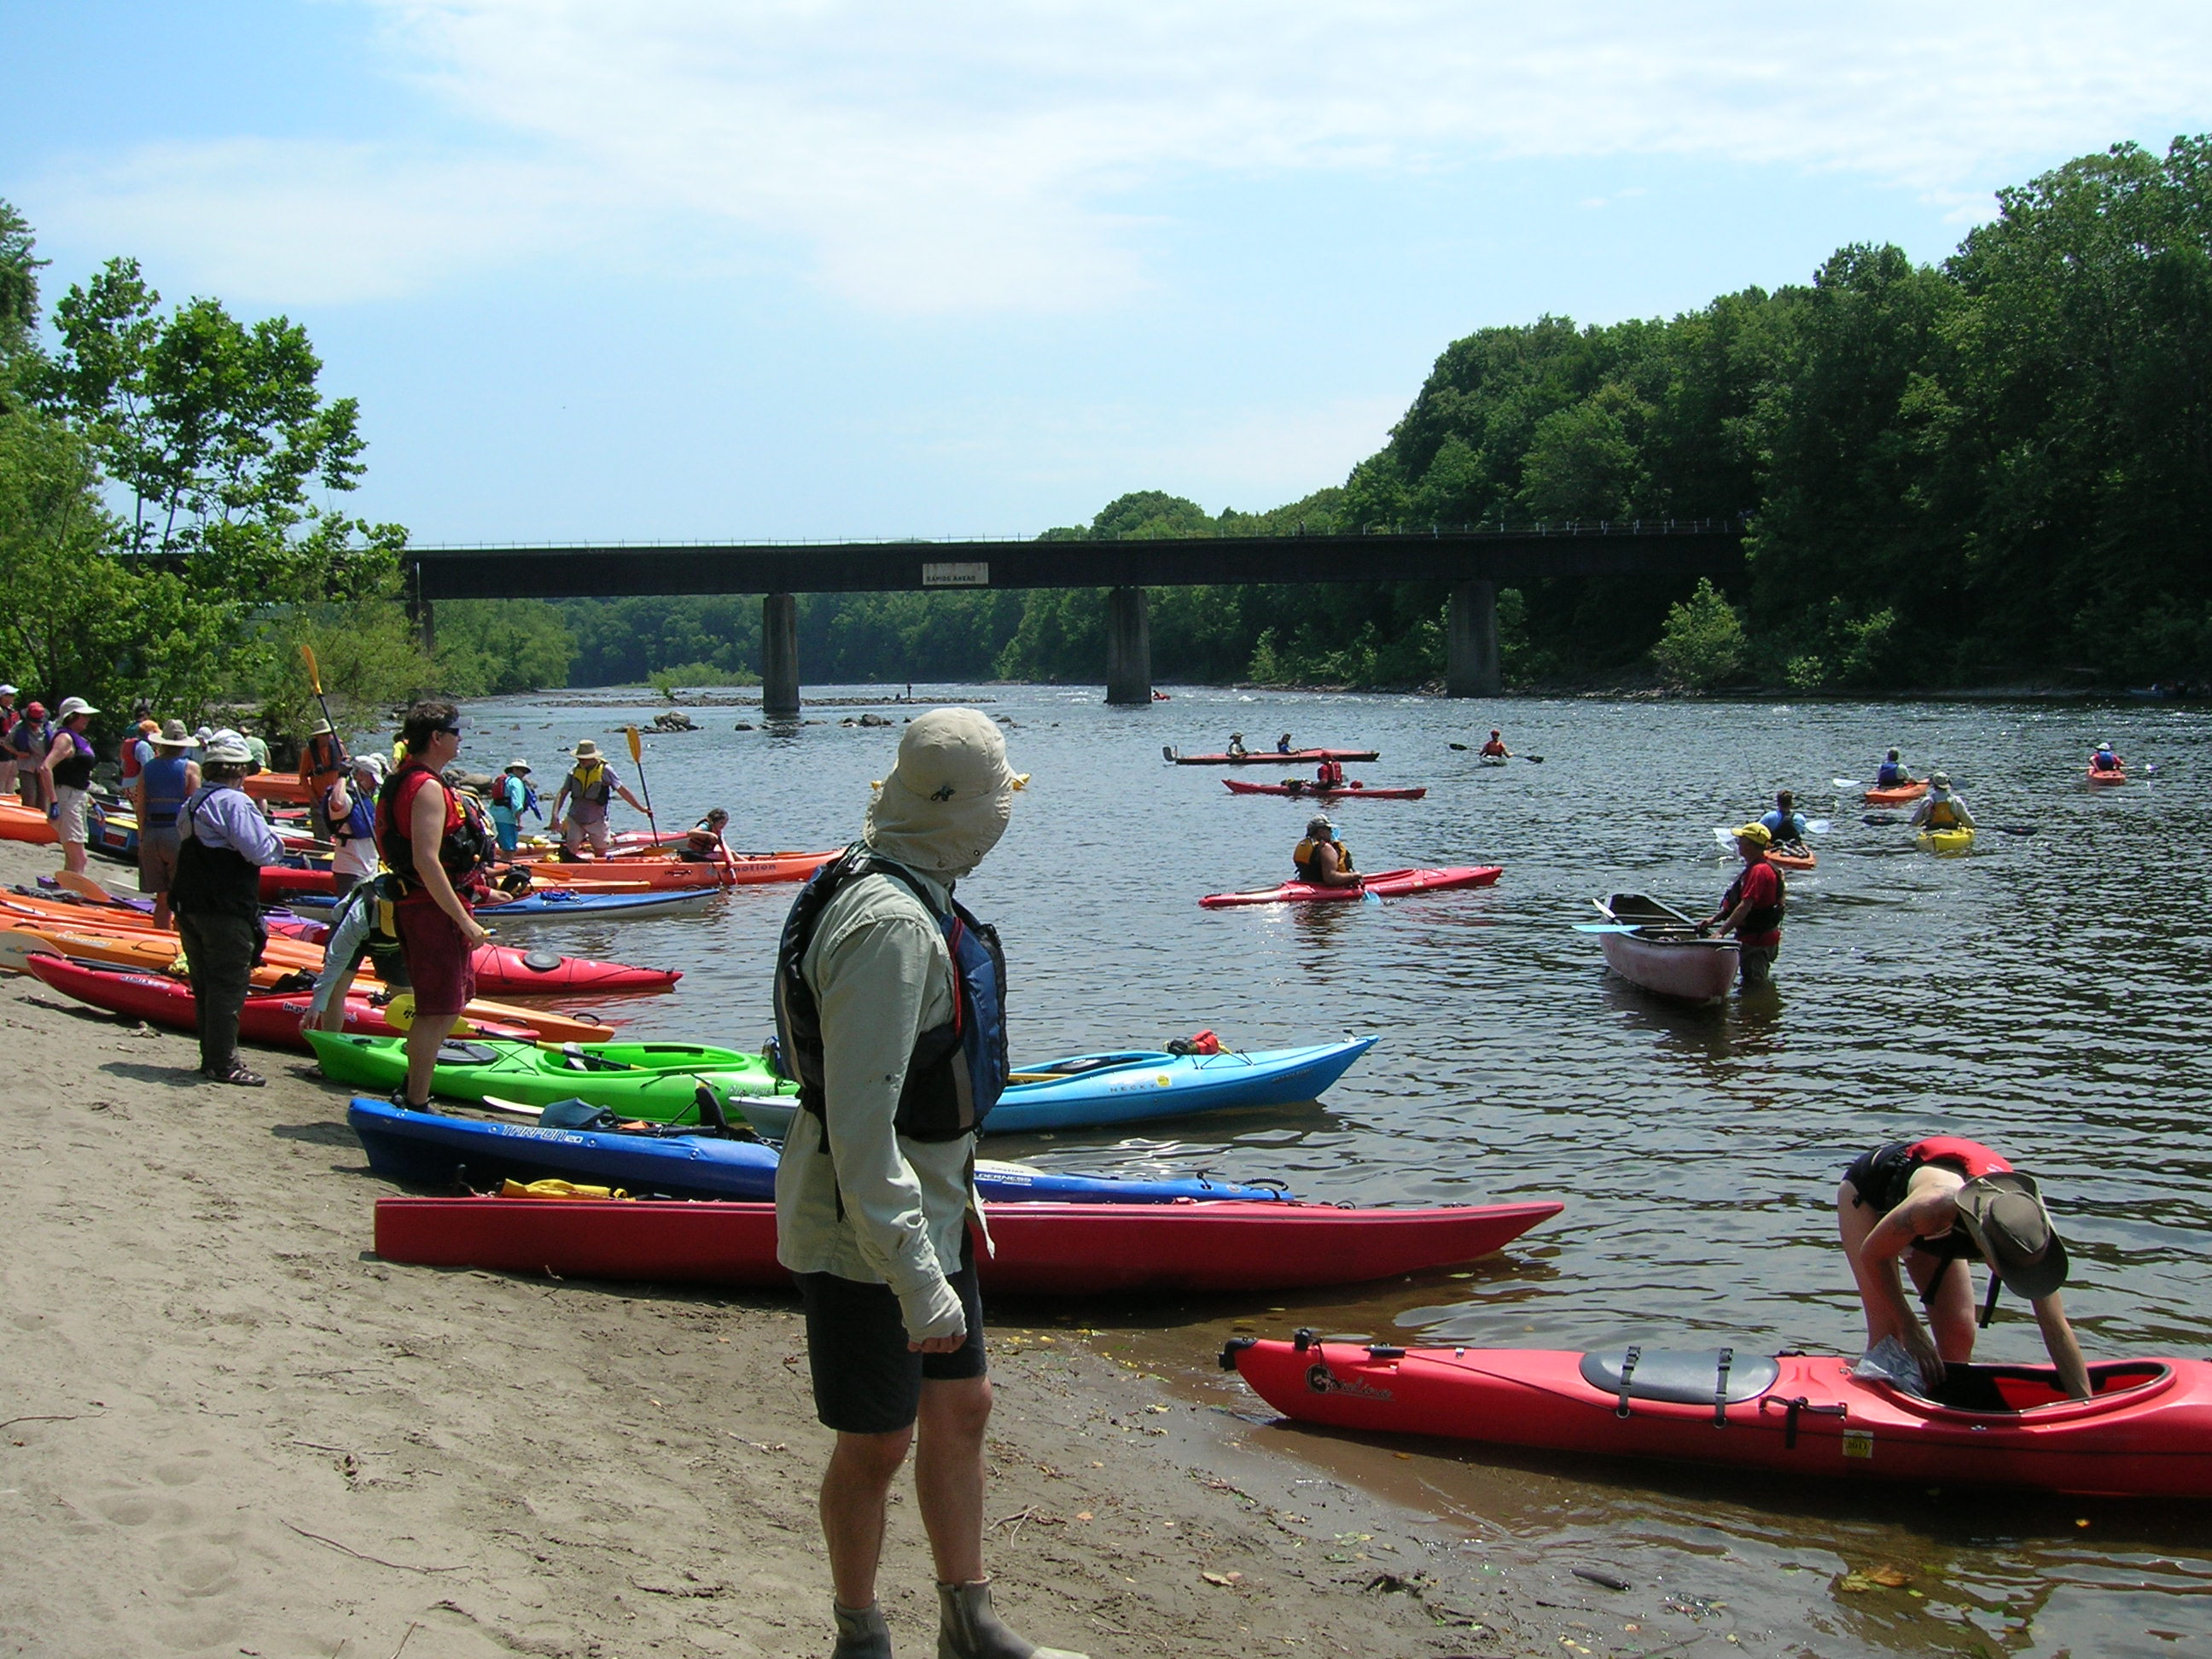 Kayakers enter the river from a riverside beach